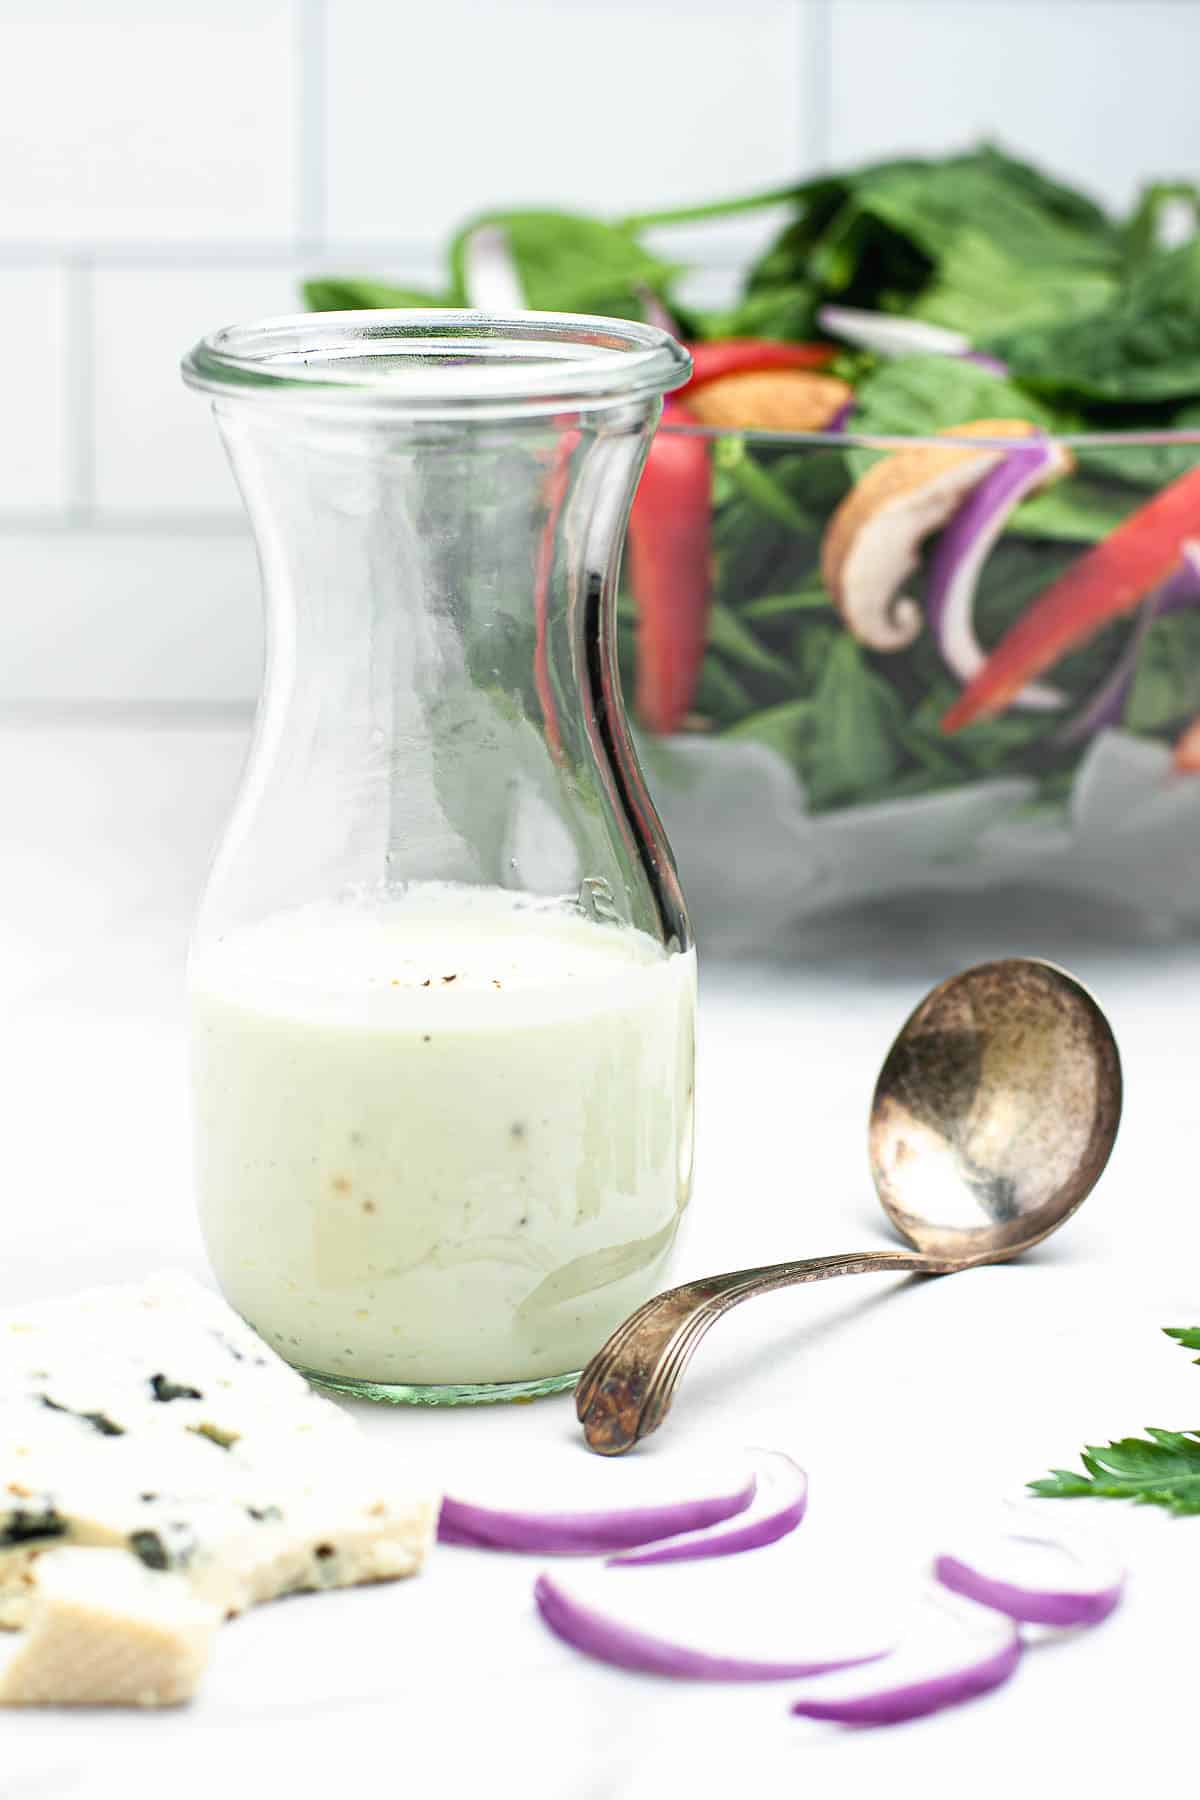 A Weck jar with Gorgonzola dressing with a salad in the background.